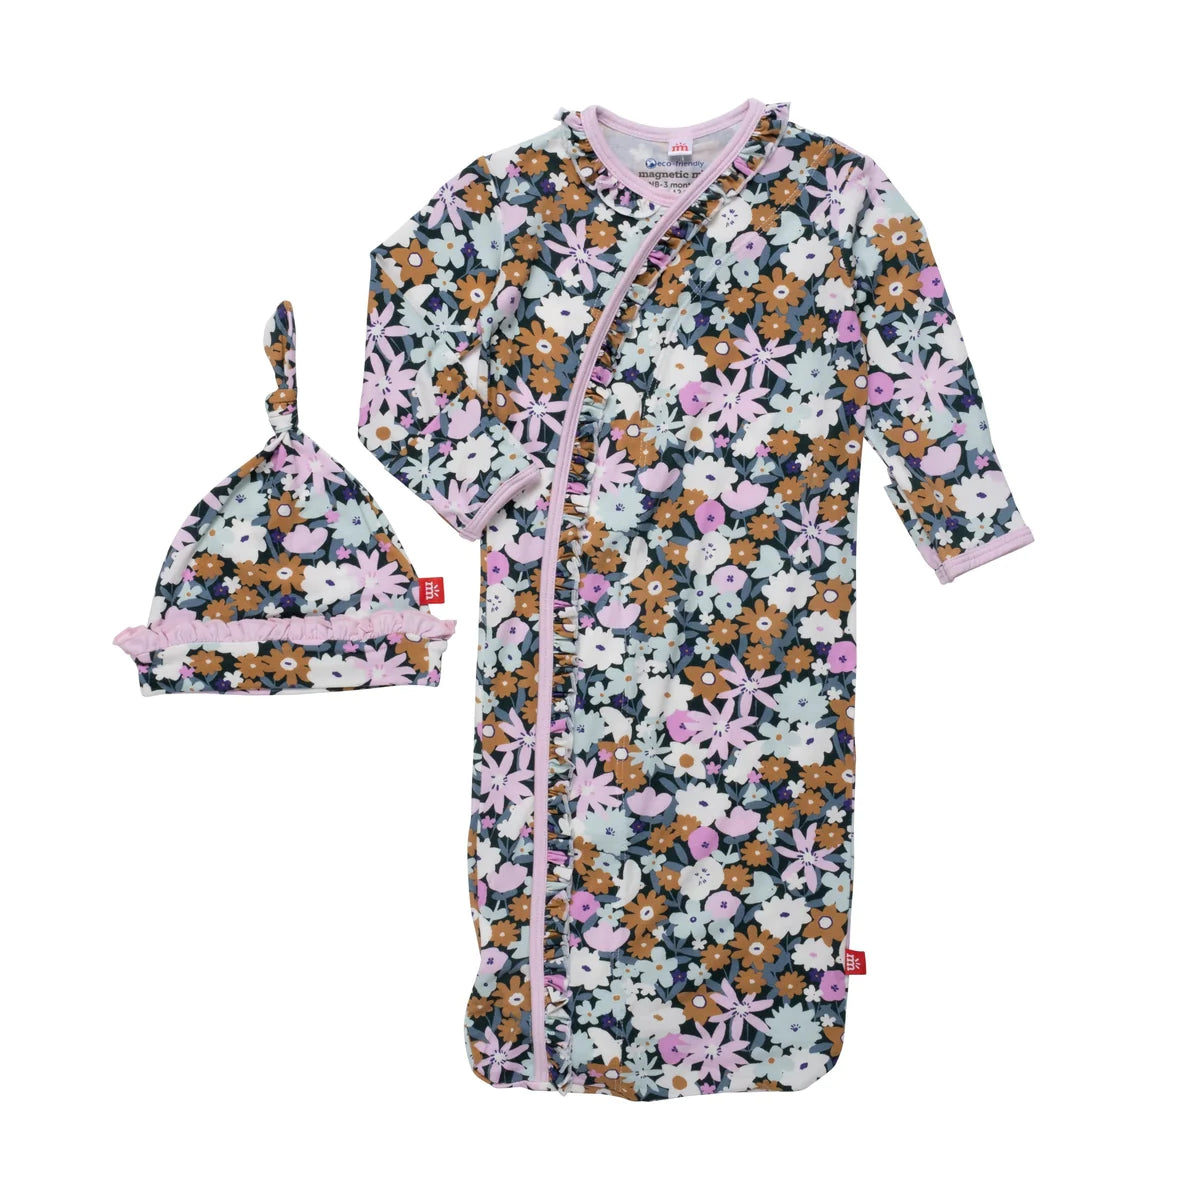 Finchley modal magnetic cozy sleeper gown + hat set